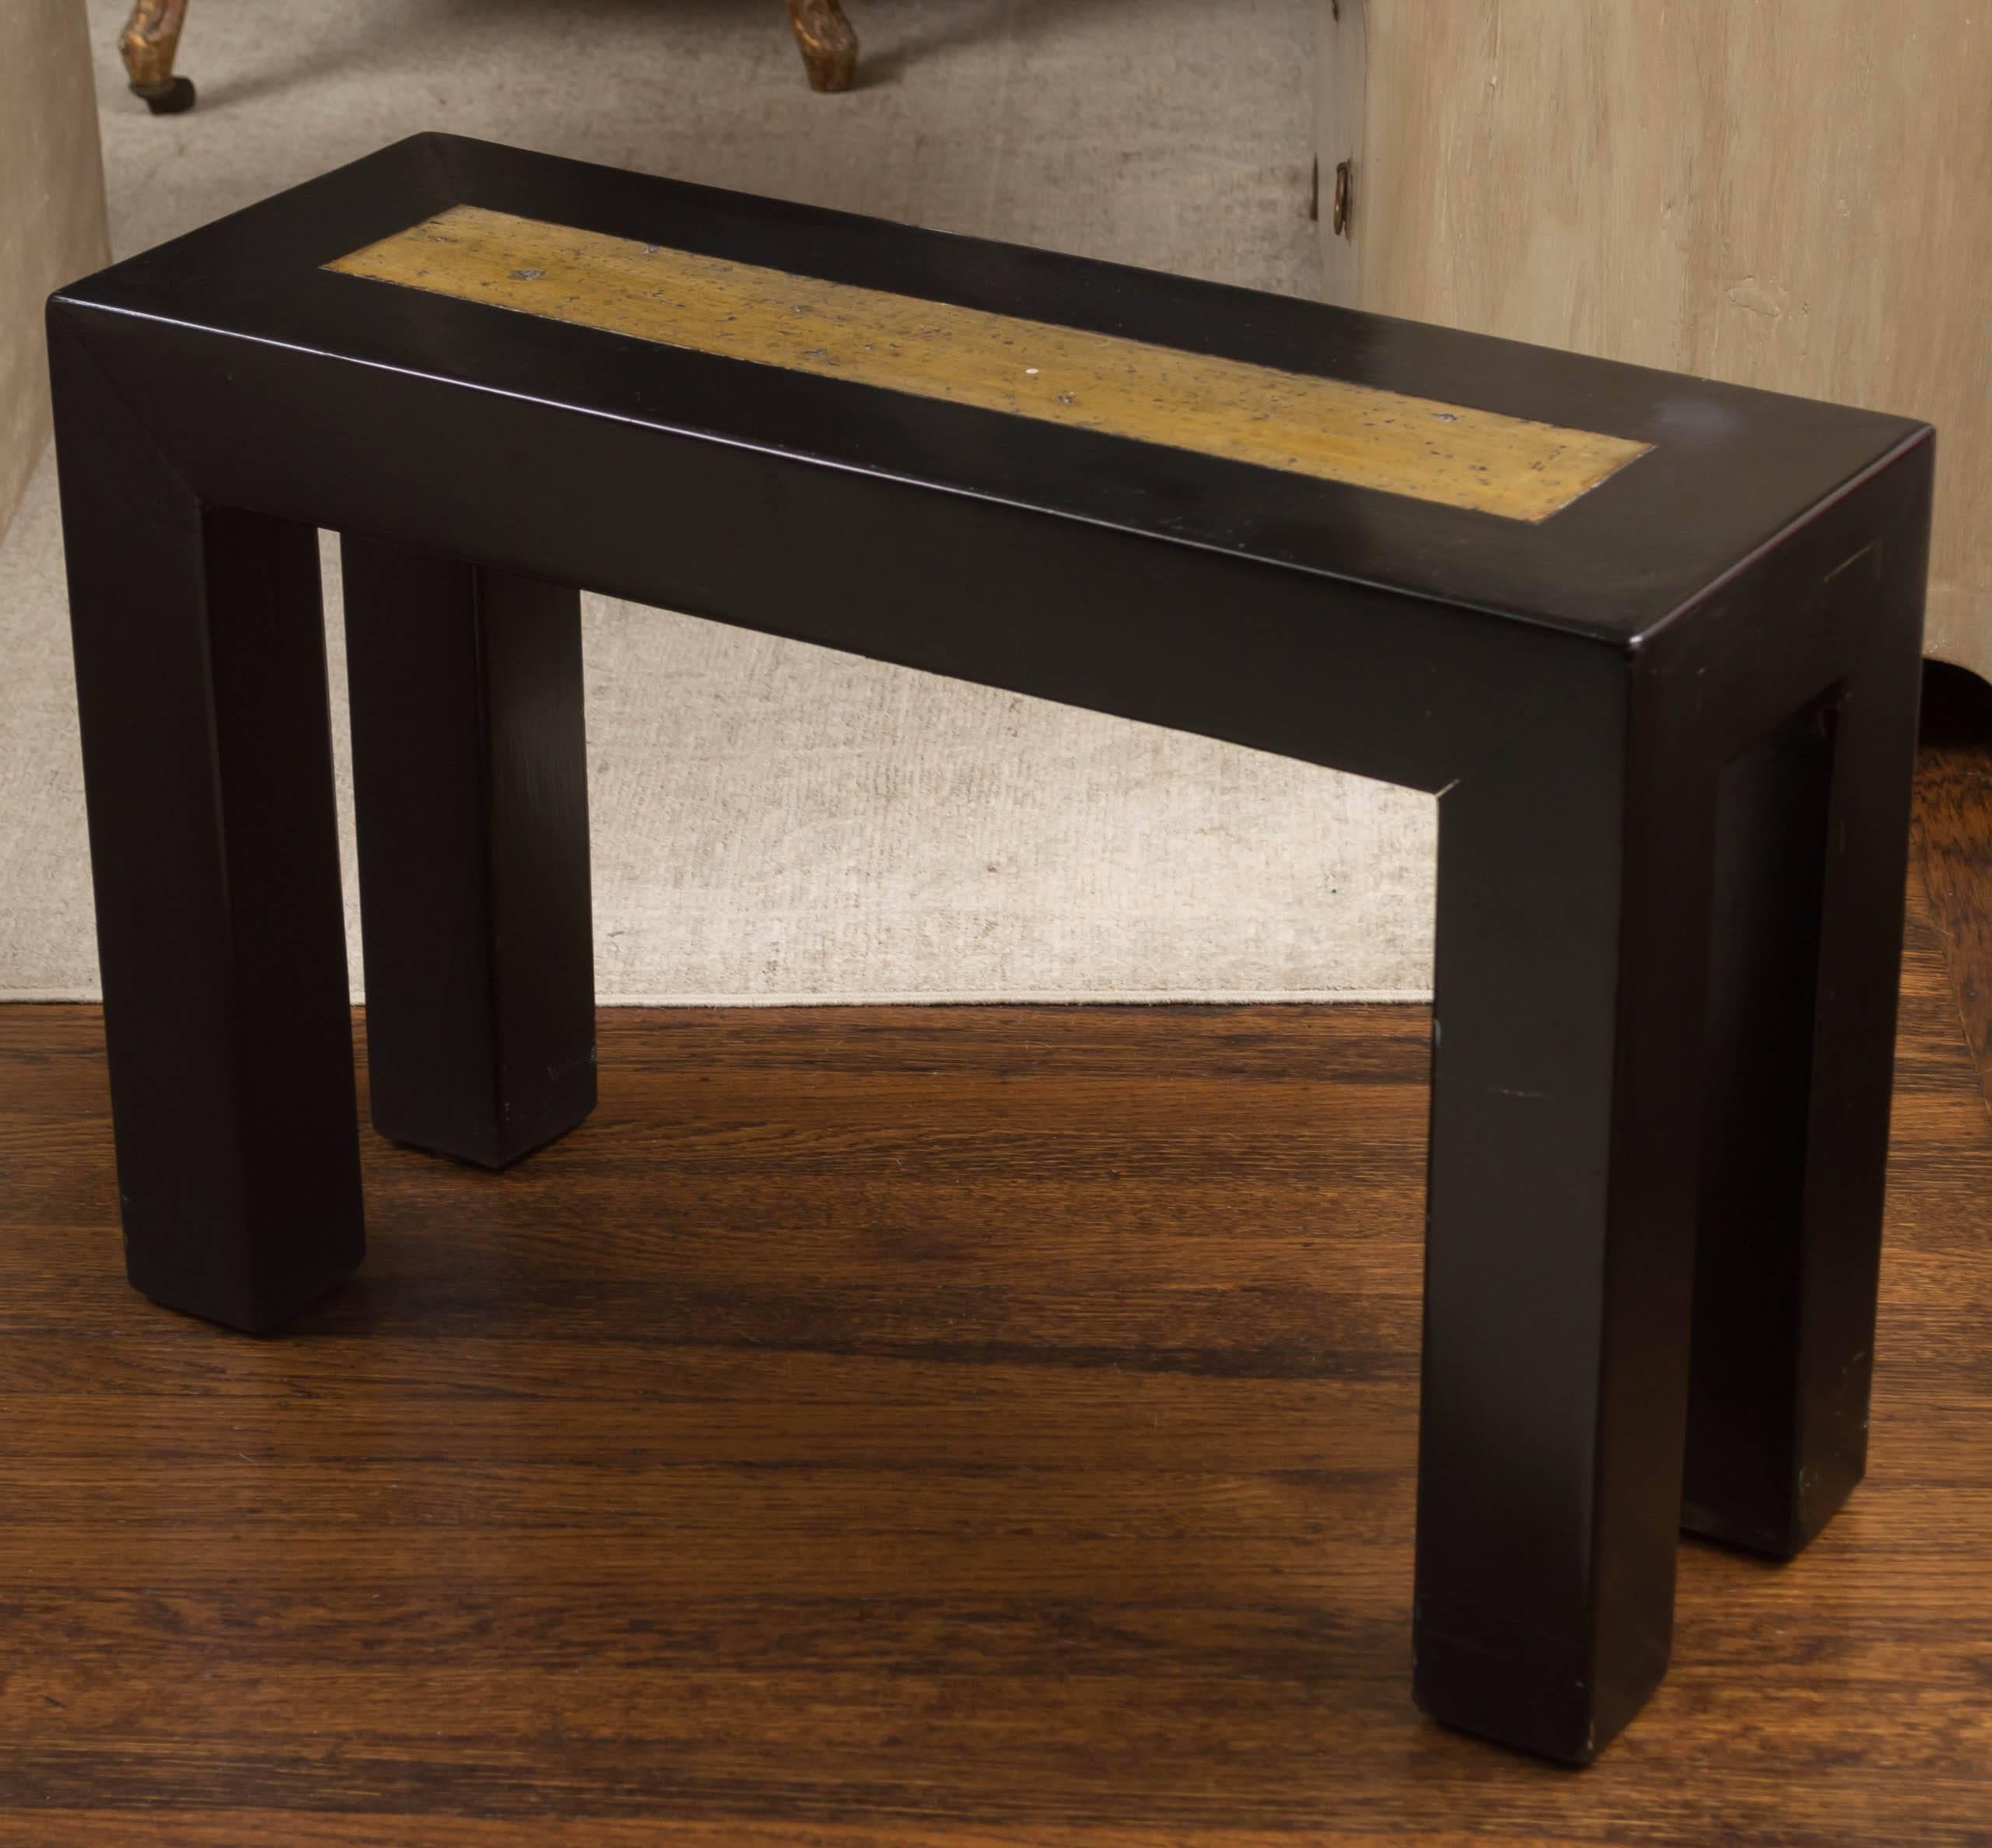 The rectangular top with inlaid citrine-colored marble set into a mortise and tenoned frame, raised on square section legs. May be used as a table or bench for seating. The category is table.